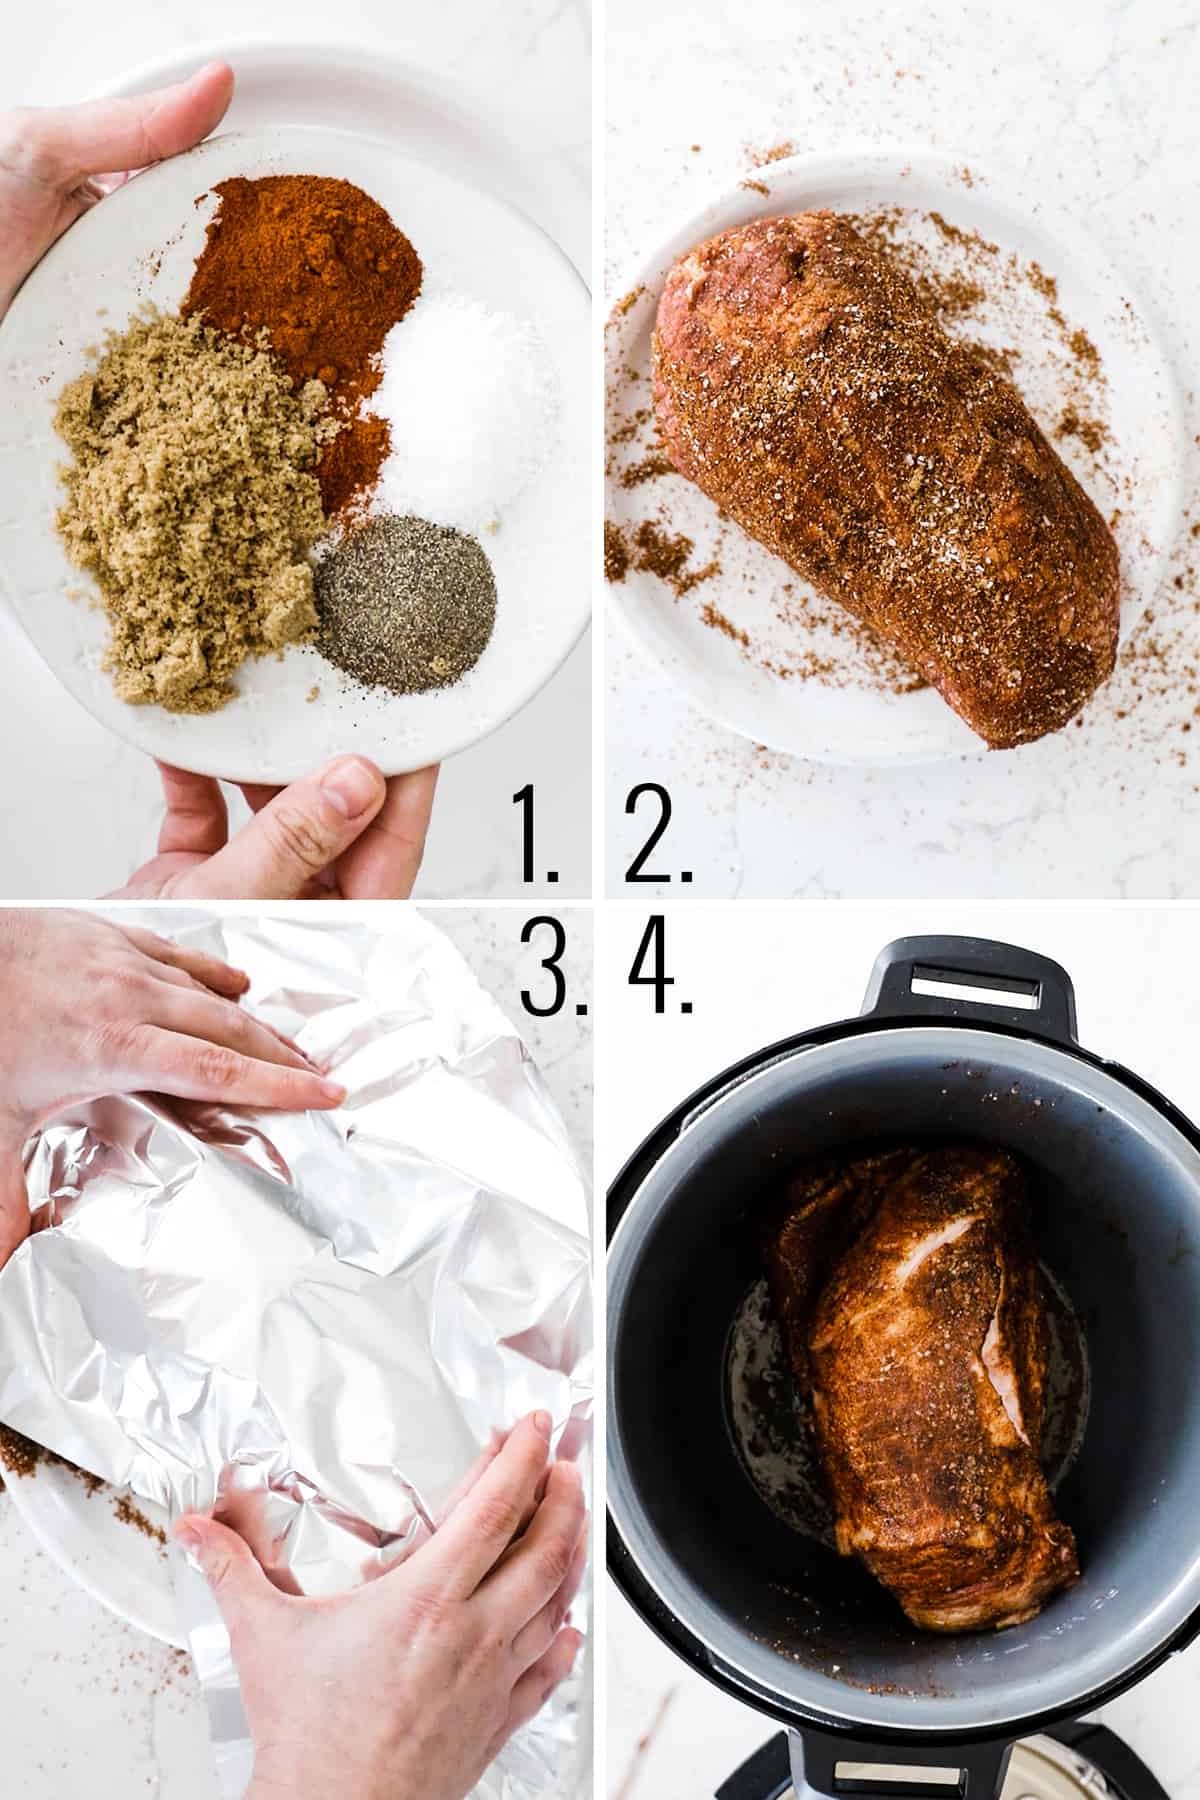 How to prepare pulled pork.